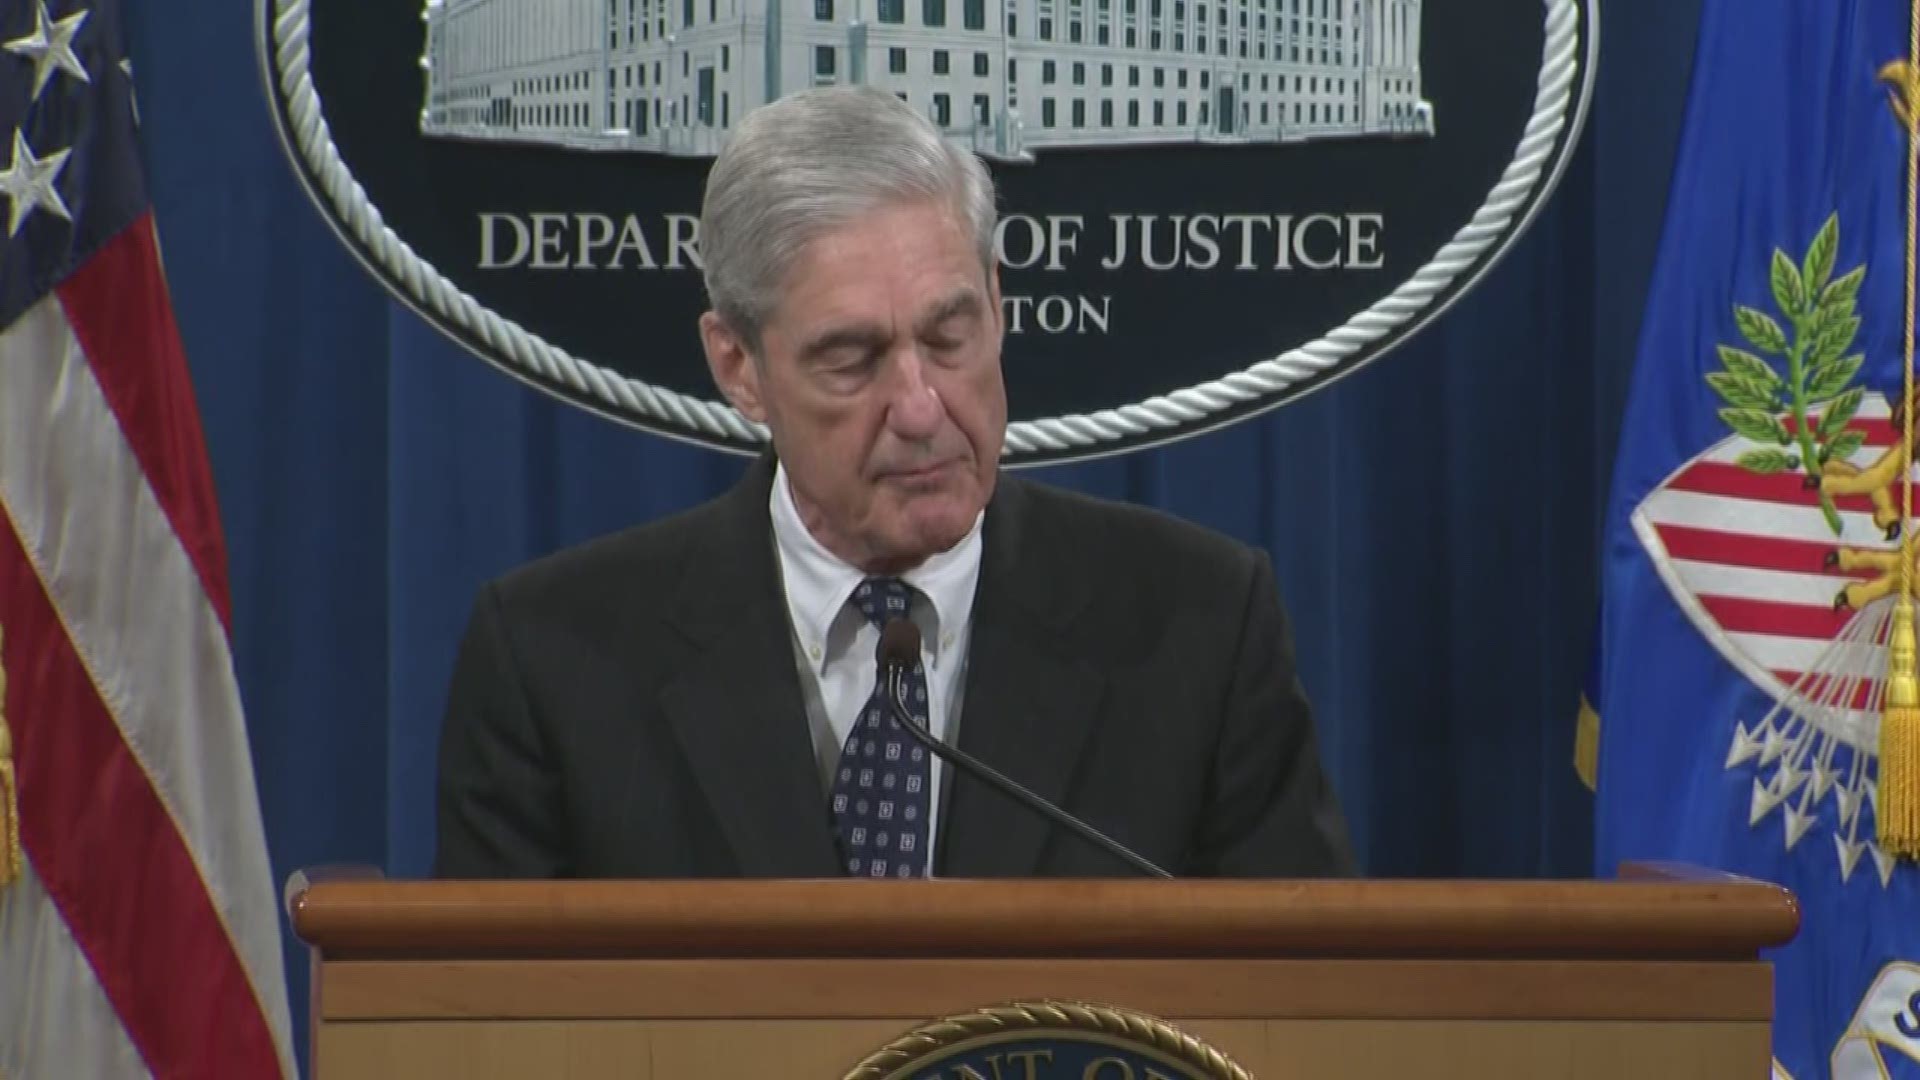 Special Counsel Robert Mueller announced his resignation in a public statement following the conclusion of the special investigation into interference in the 2016 presidential election